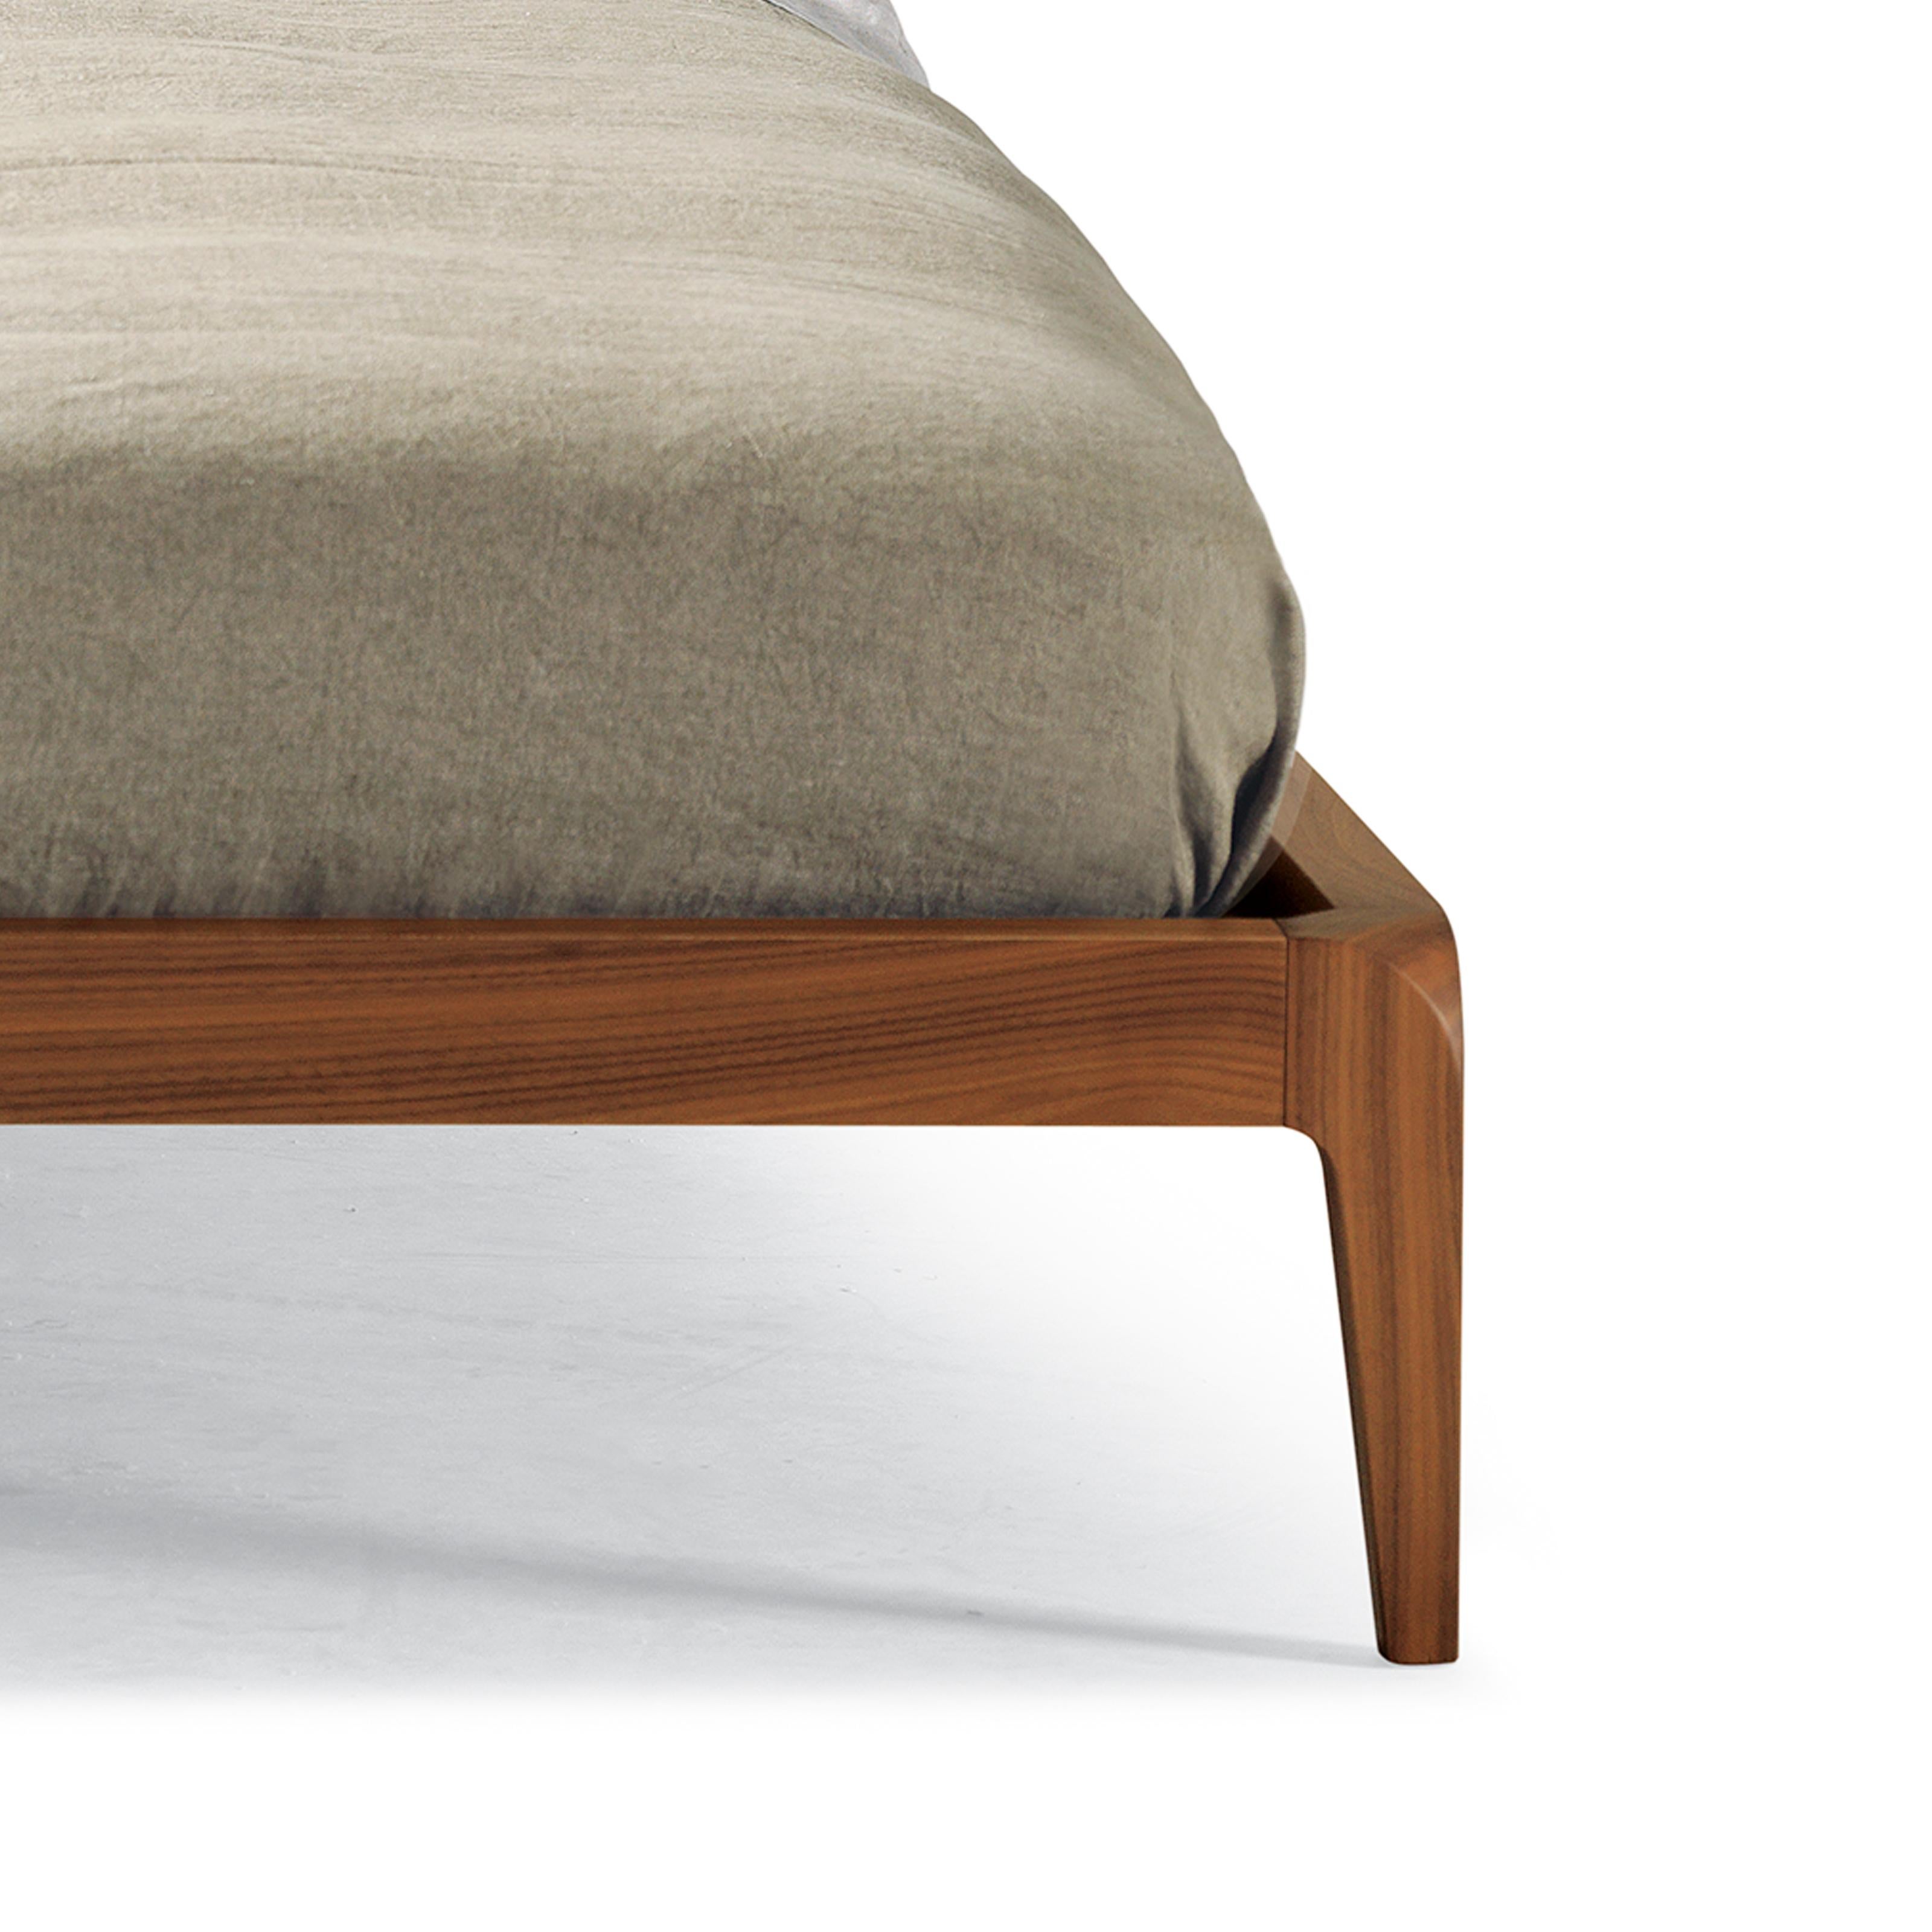 Italian Sig, re Solid Wood Bed, Walnut in Hand-Made Natural Finish, Contemporary For Sale